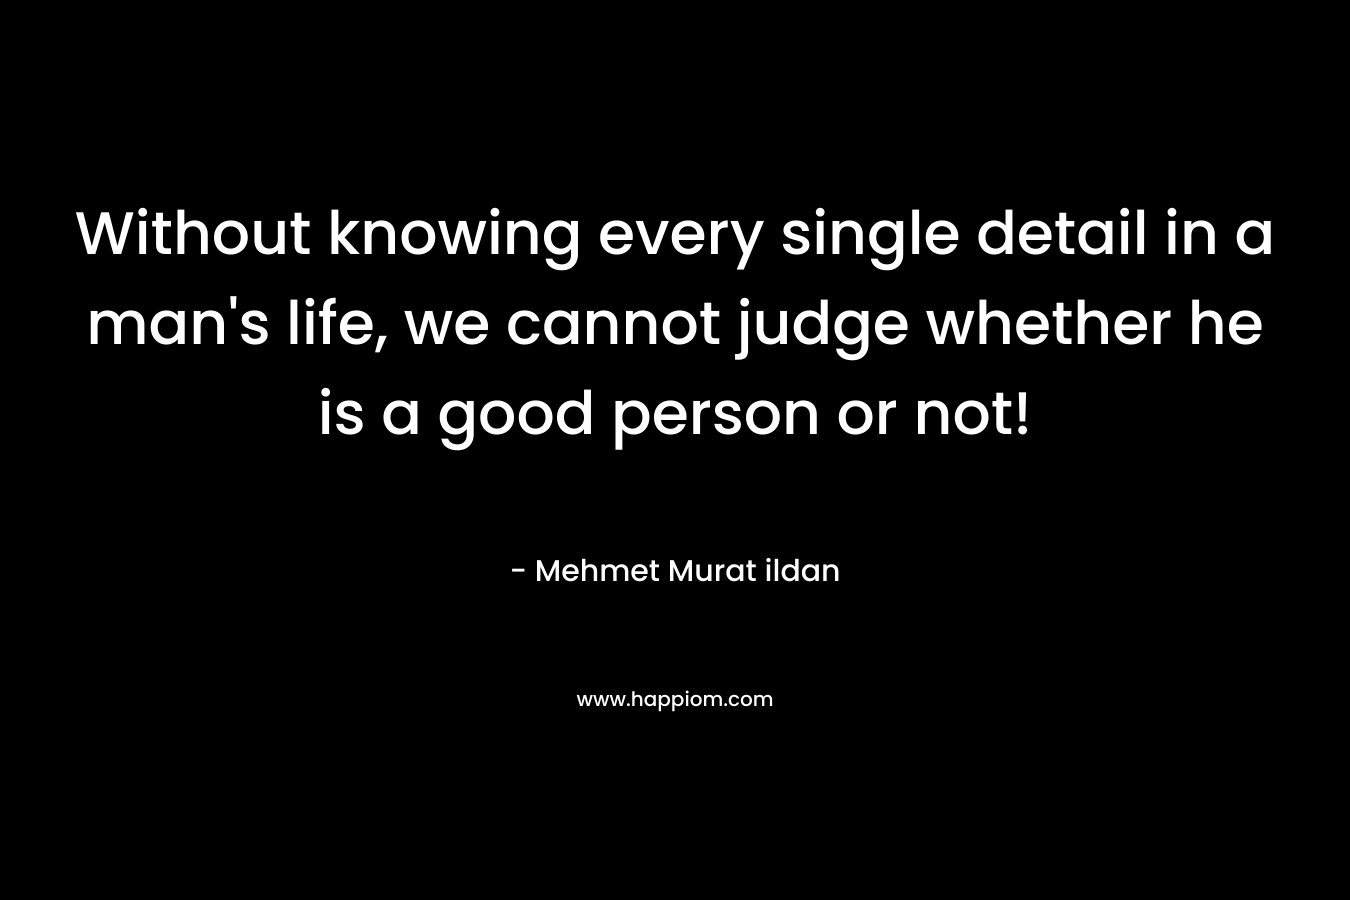 Without knowing every single detail in a man’s life, we cannot judge whether he is a good person or not! – Mehmet Murat ildan